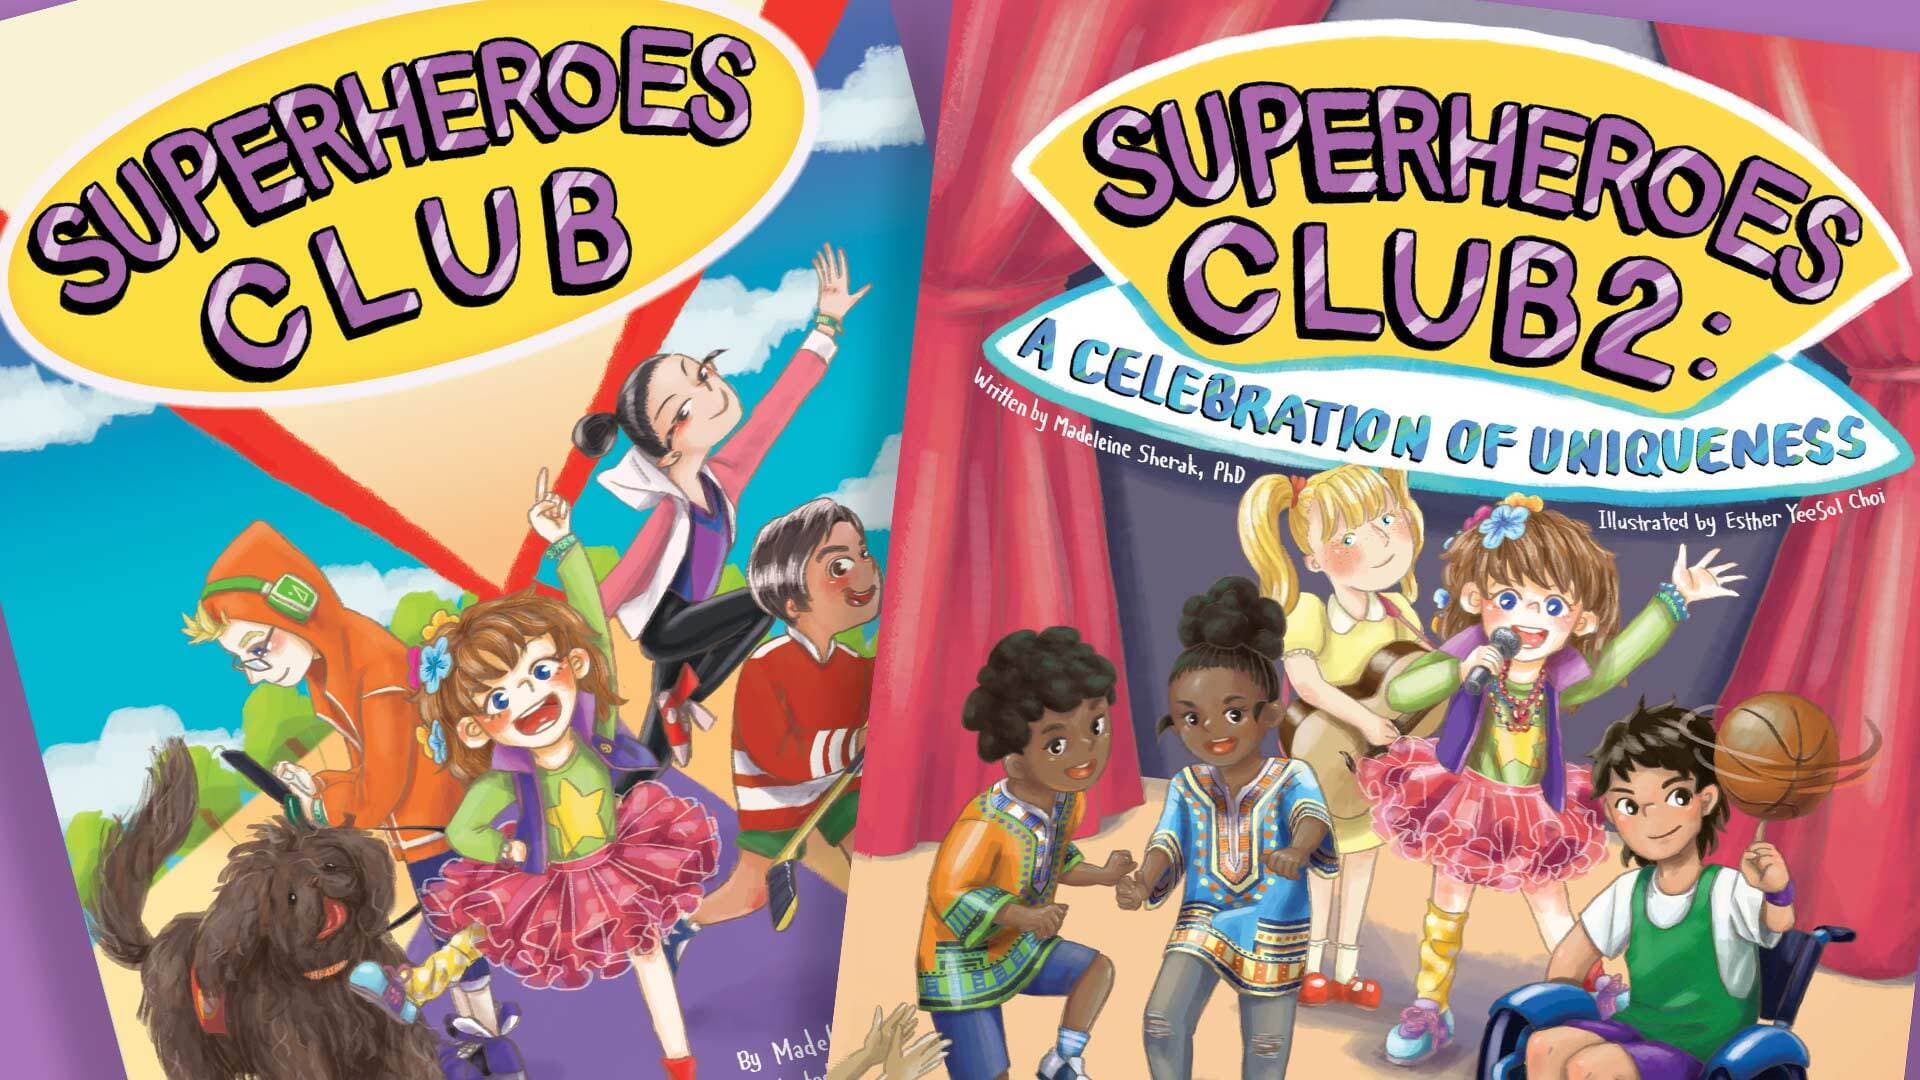 Superheroes Club and Superheroes Club 2: A Celebration of Uniqueness book covers